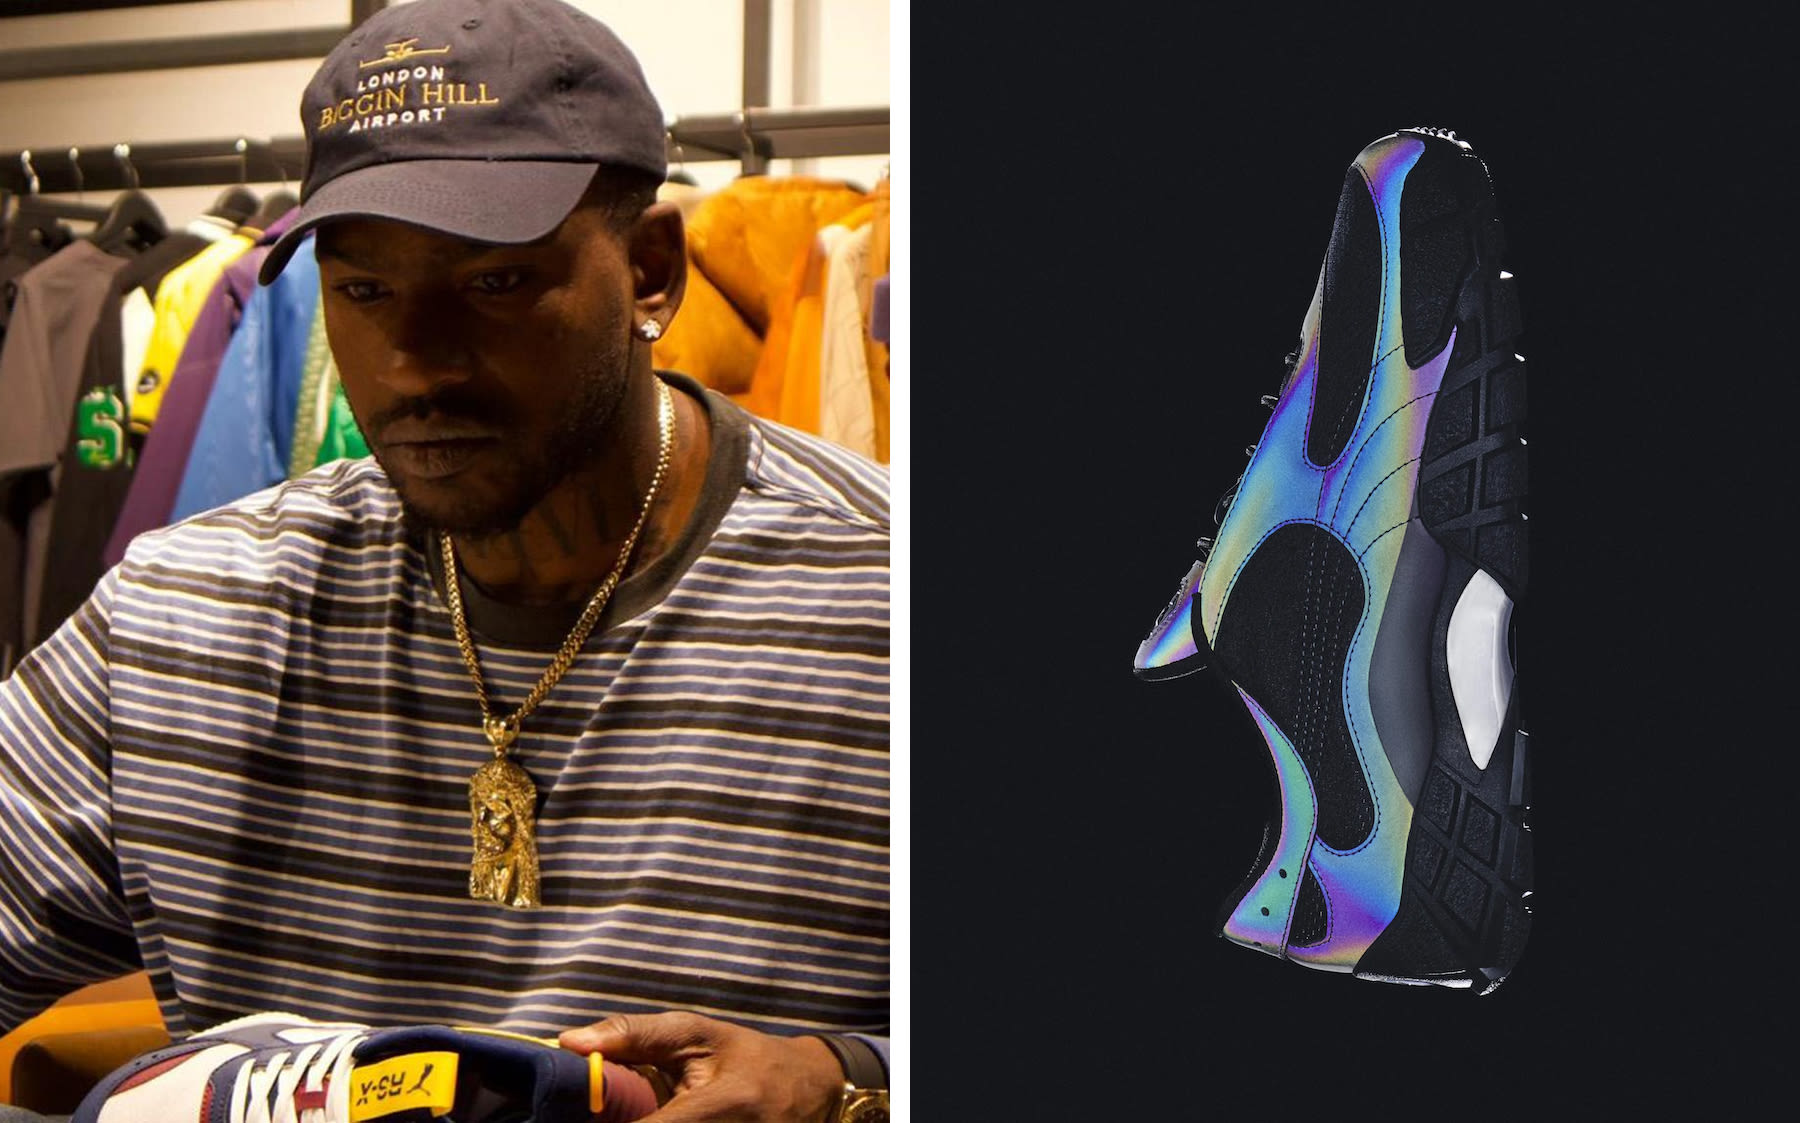 Skepta Criticizes Previous Nike Deal, Says He Was Treated Like an ‘Influencer’ for Sneaker Designs